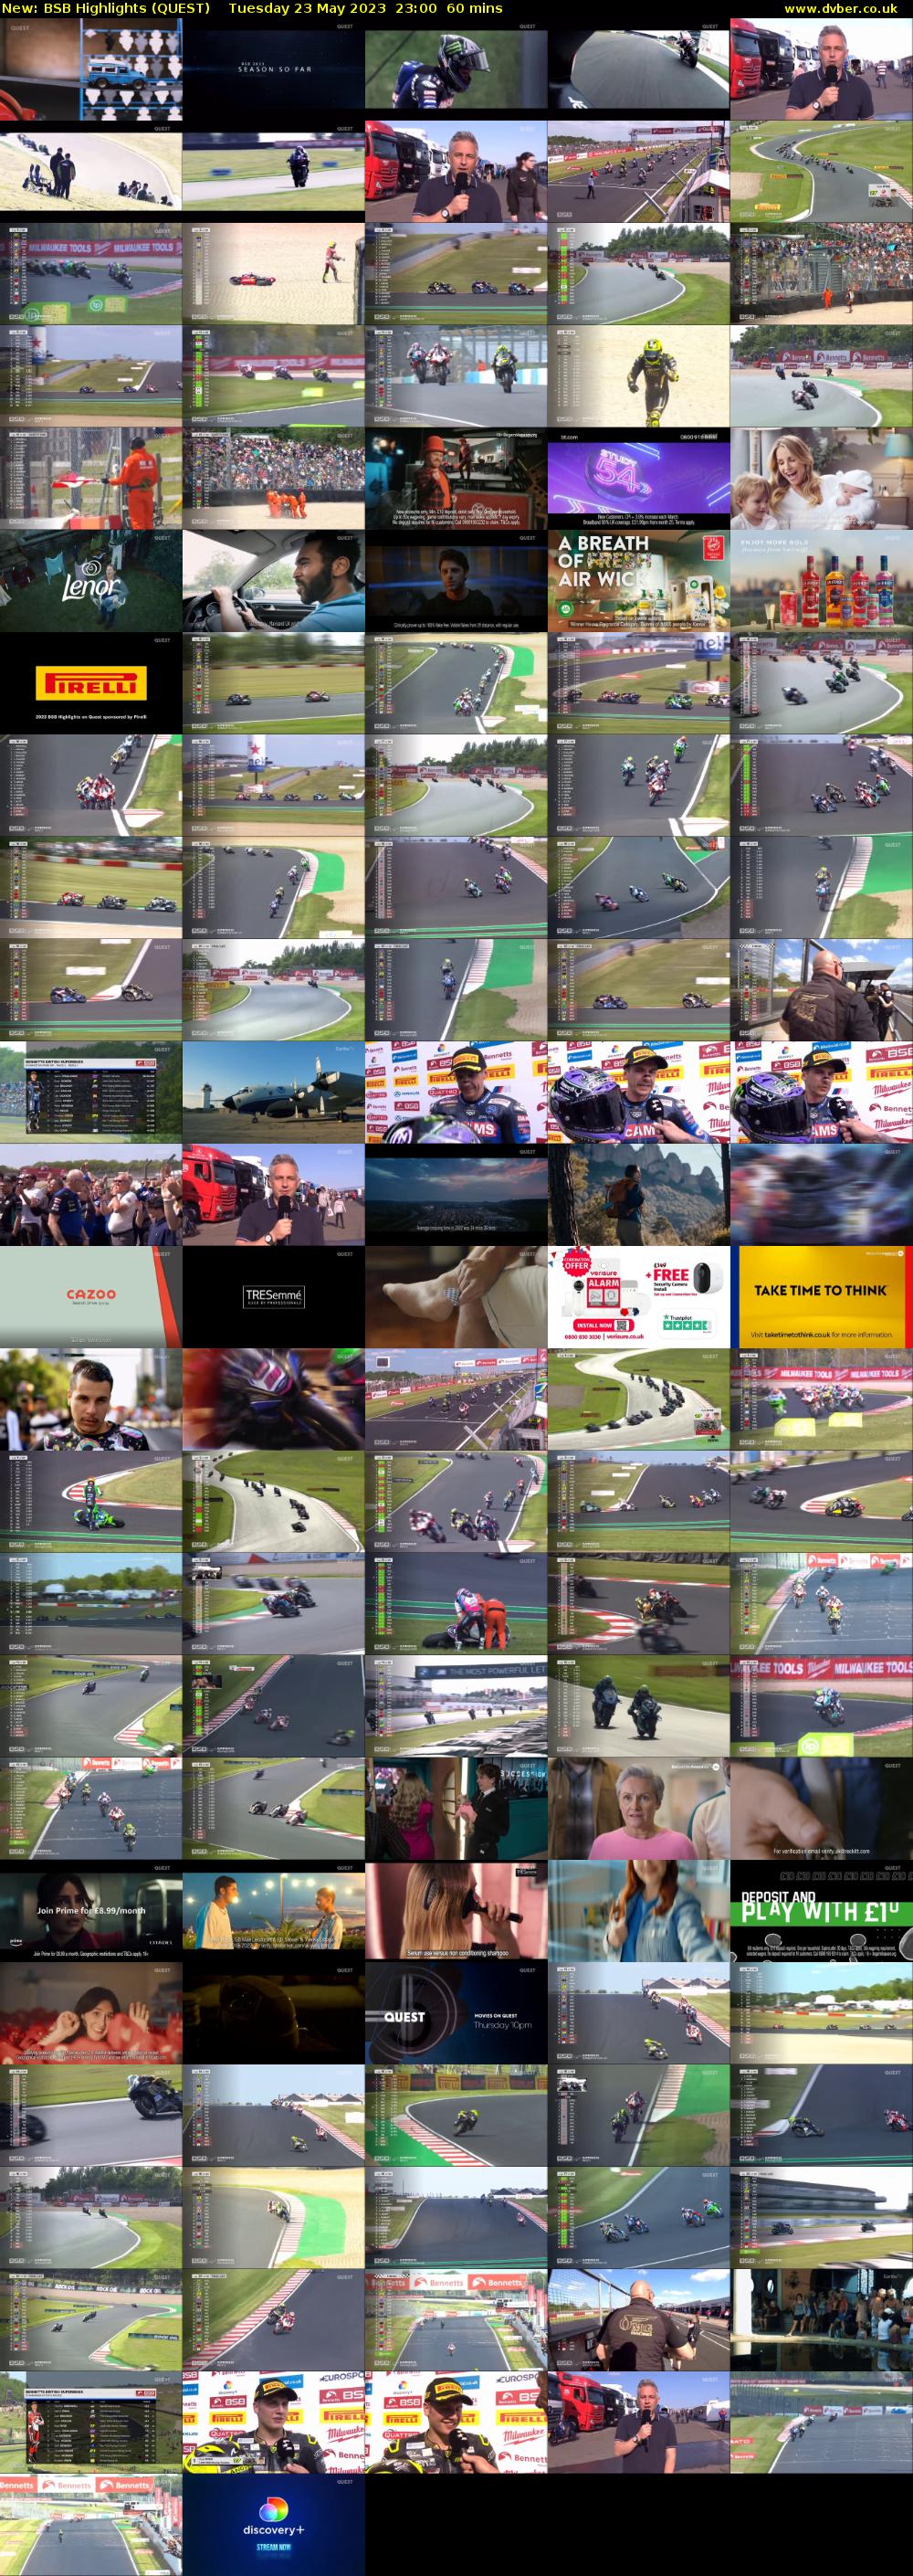 BSB Highlights (QUEST) Tuesday 23 May 2023 23:00 - 00:00